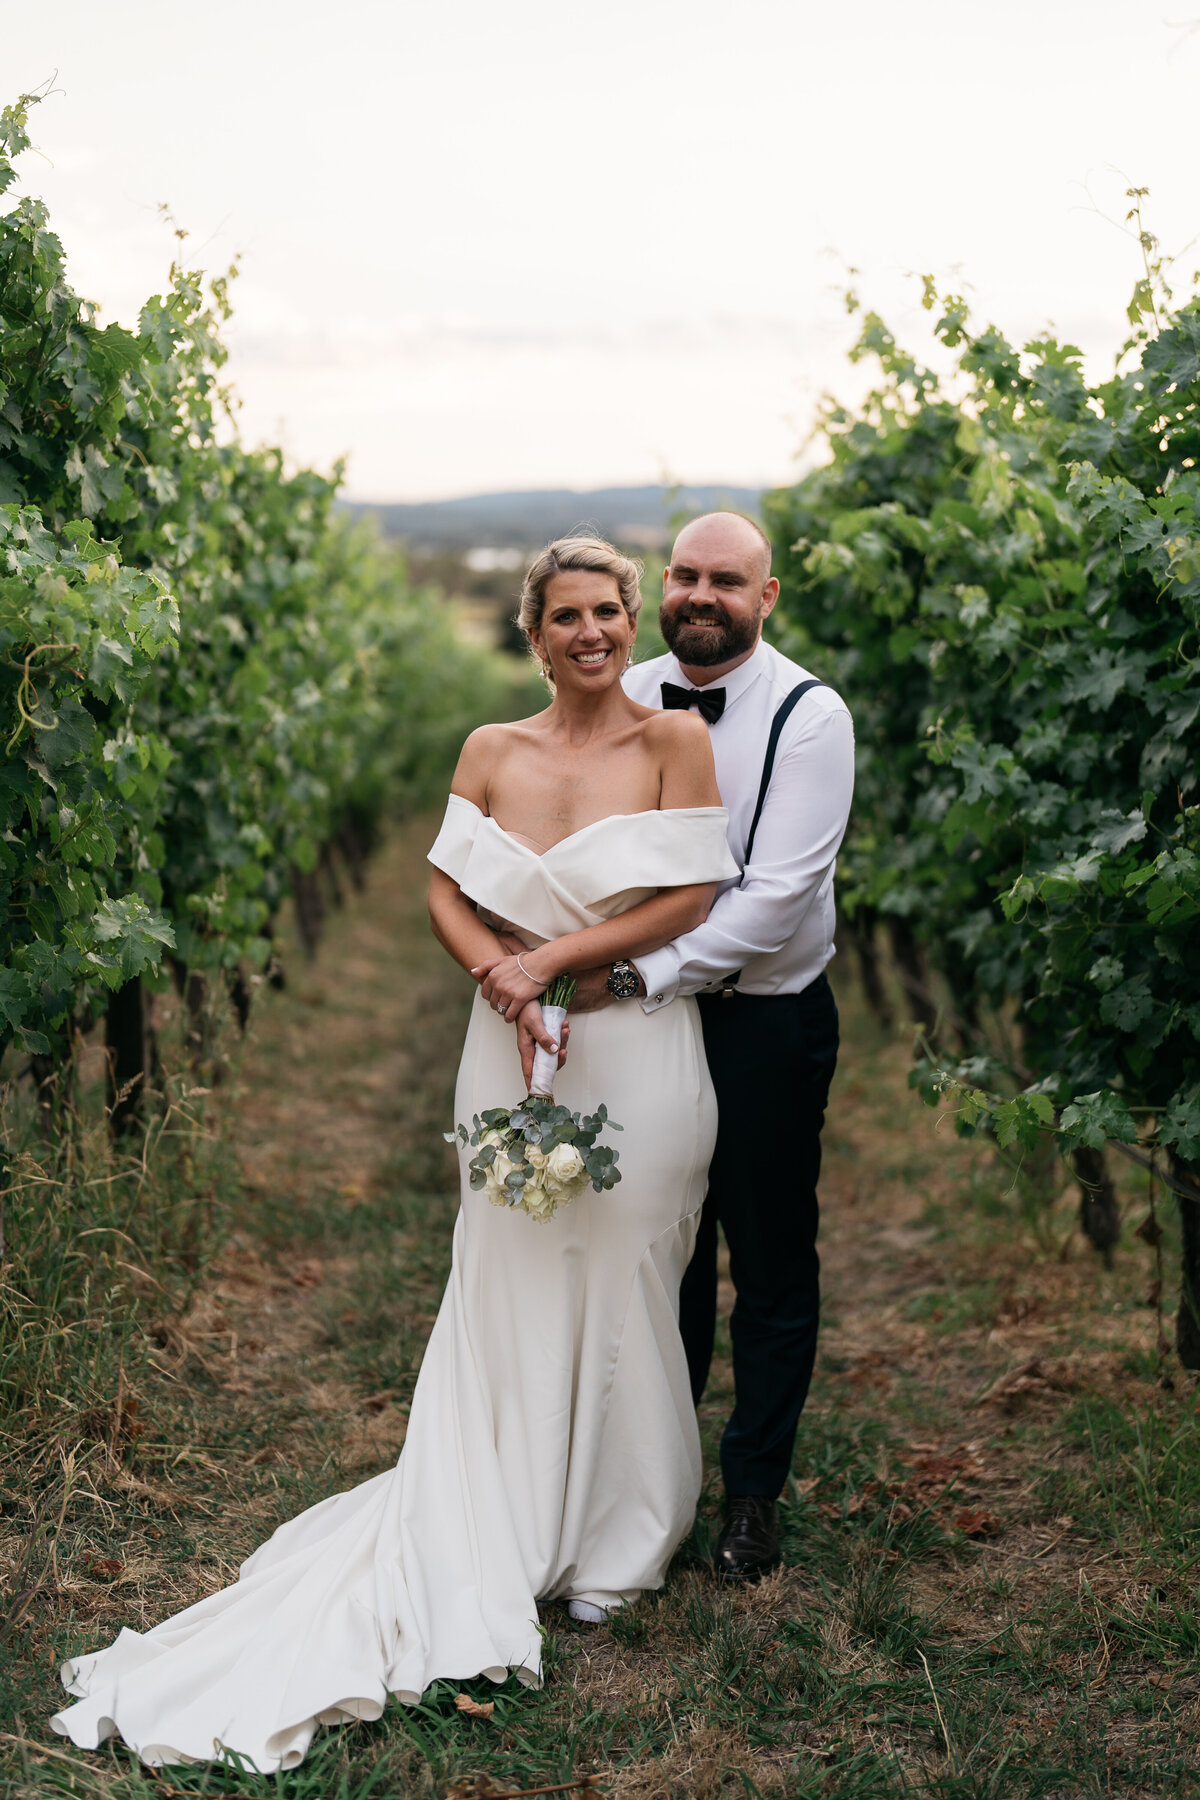 Courtney Laura Photography, Stones of the Yarra Valley, Yarra Valley Weddings Photographer, Samantha and Kyle-1004